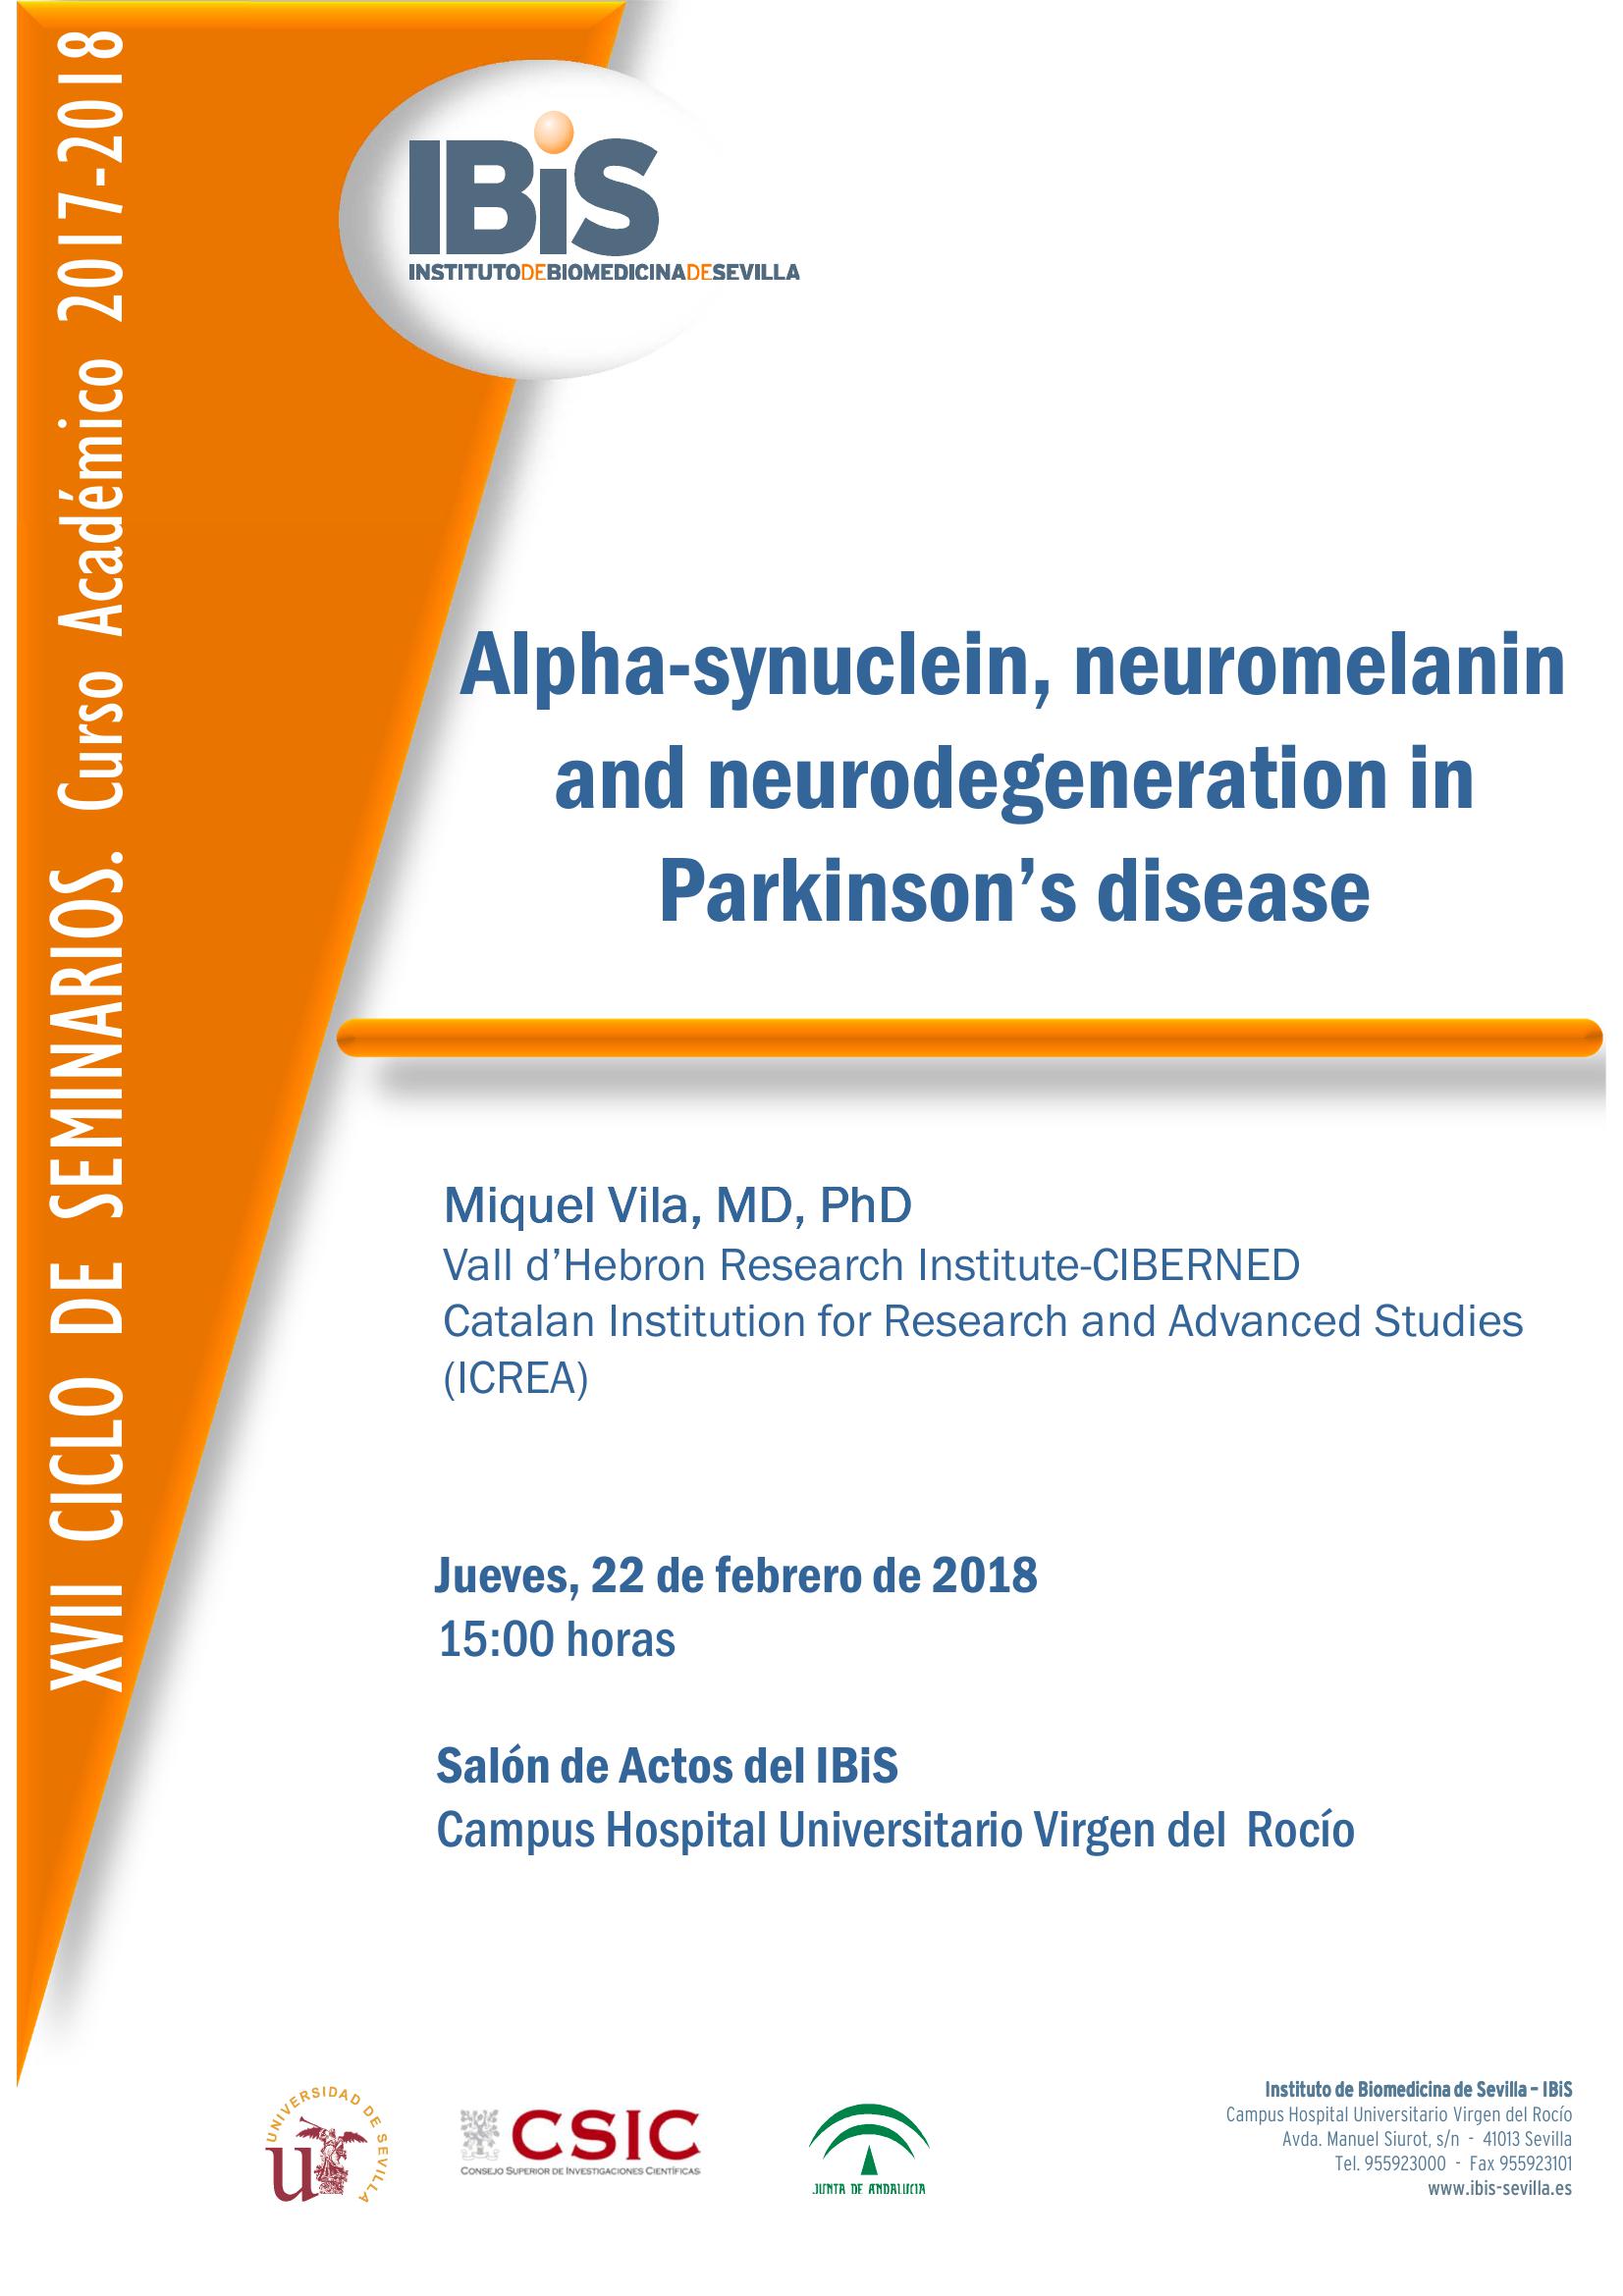 Poster: Alpha-synuclein, neuromelanin and neurodegeneration in Parkinson’s disease